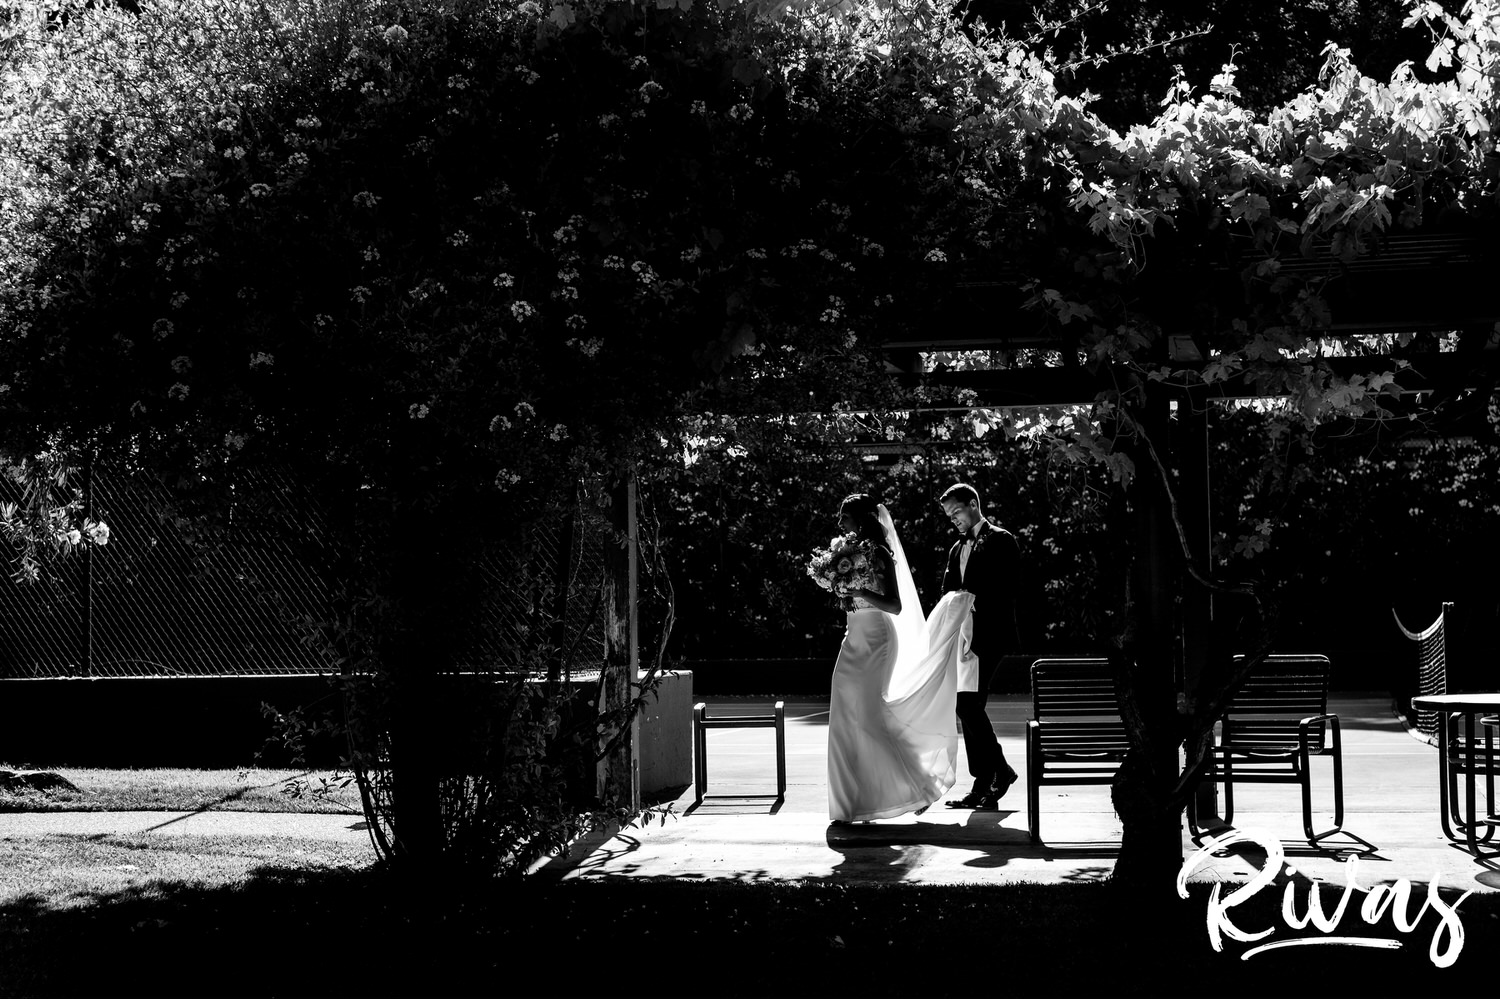 Saddlerock Ranch Summer Wedding | Destination Wedding Photographers | Rivas | A black and white image of a bride and groom walking underneath an arbor of flowers while the groom carries the bride's train and veil. 